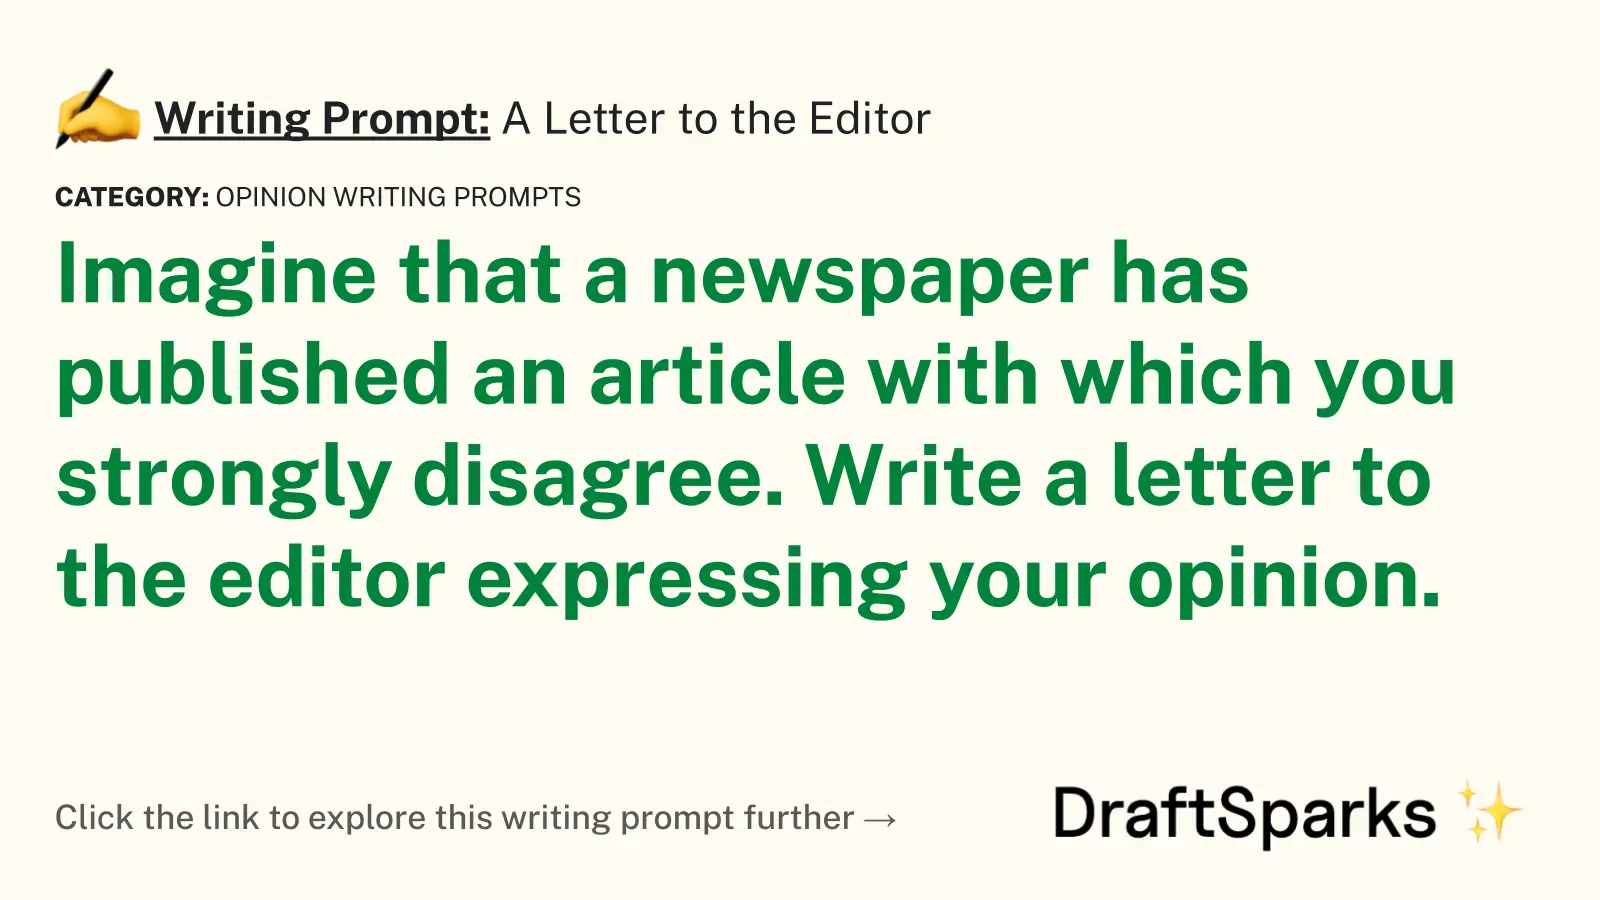 A Letter to the Editor